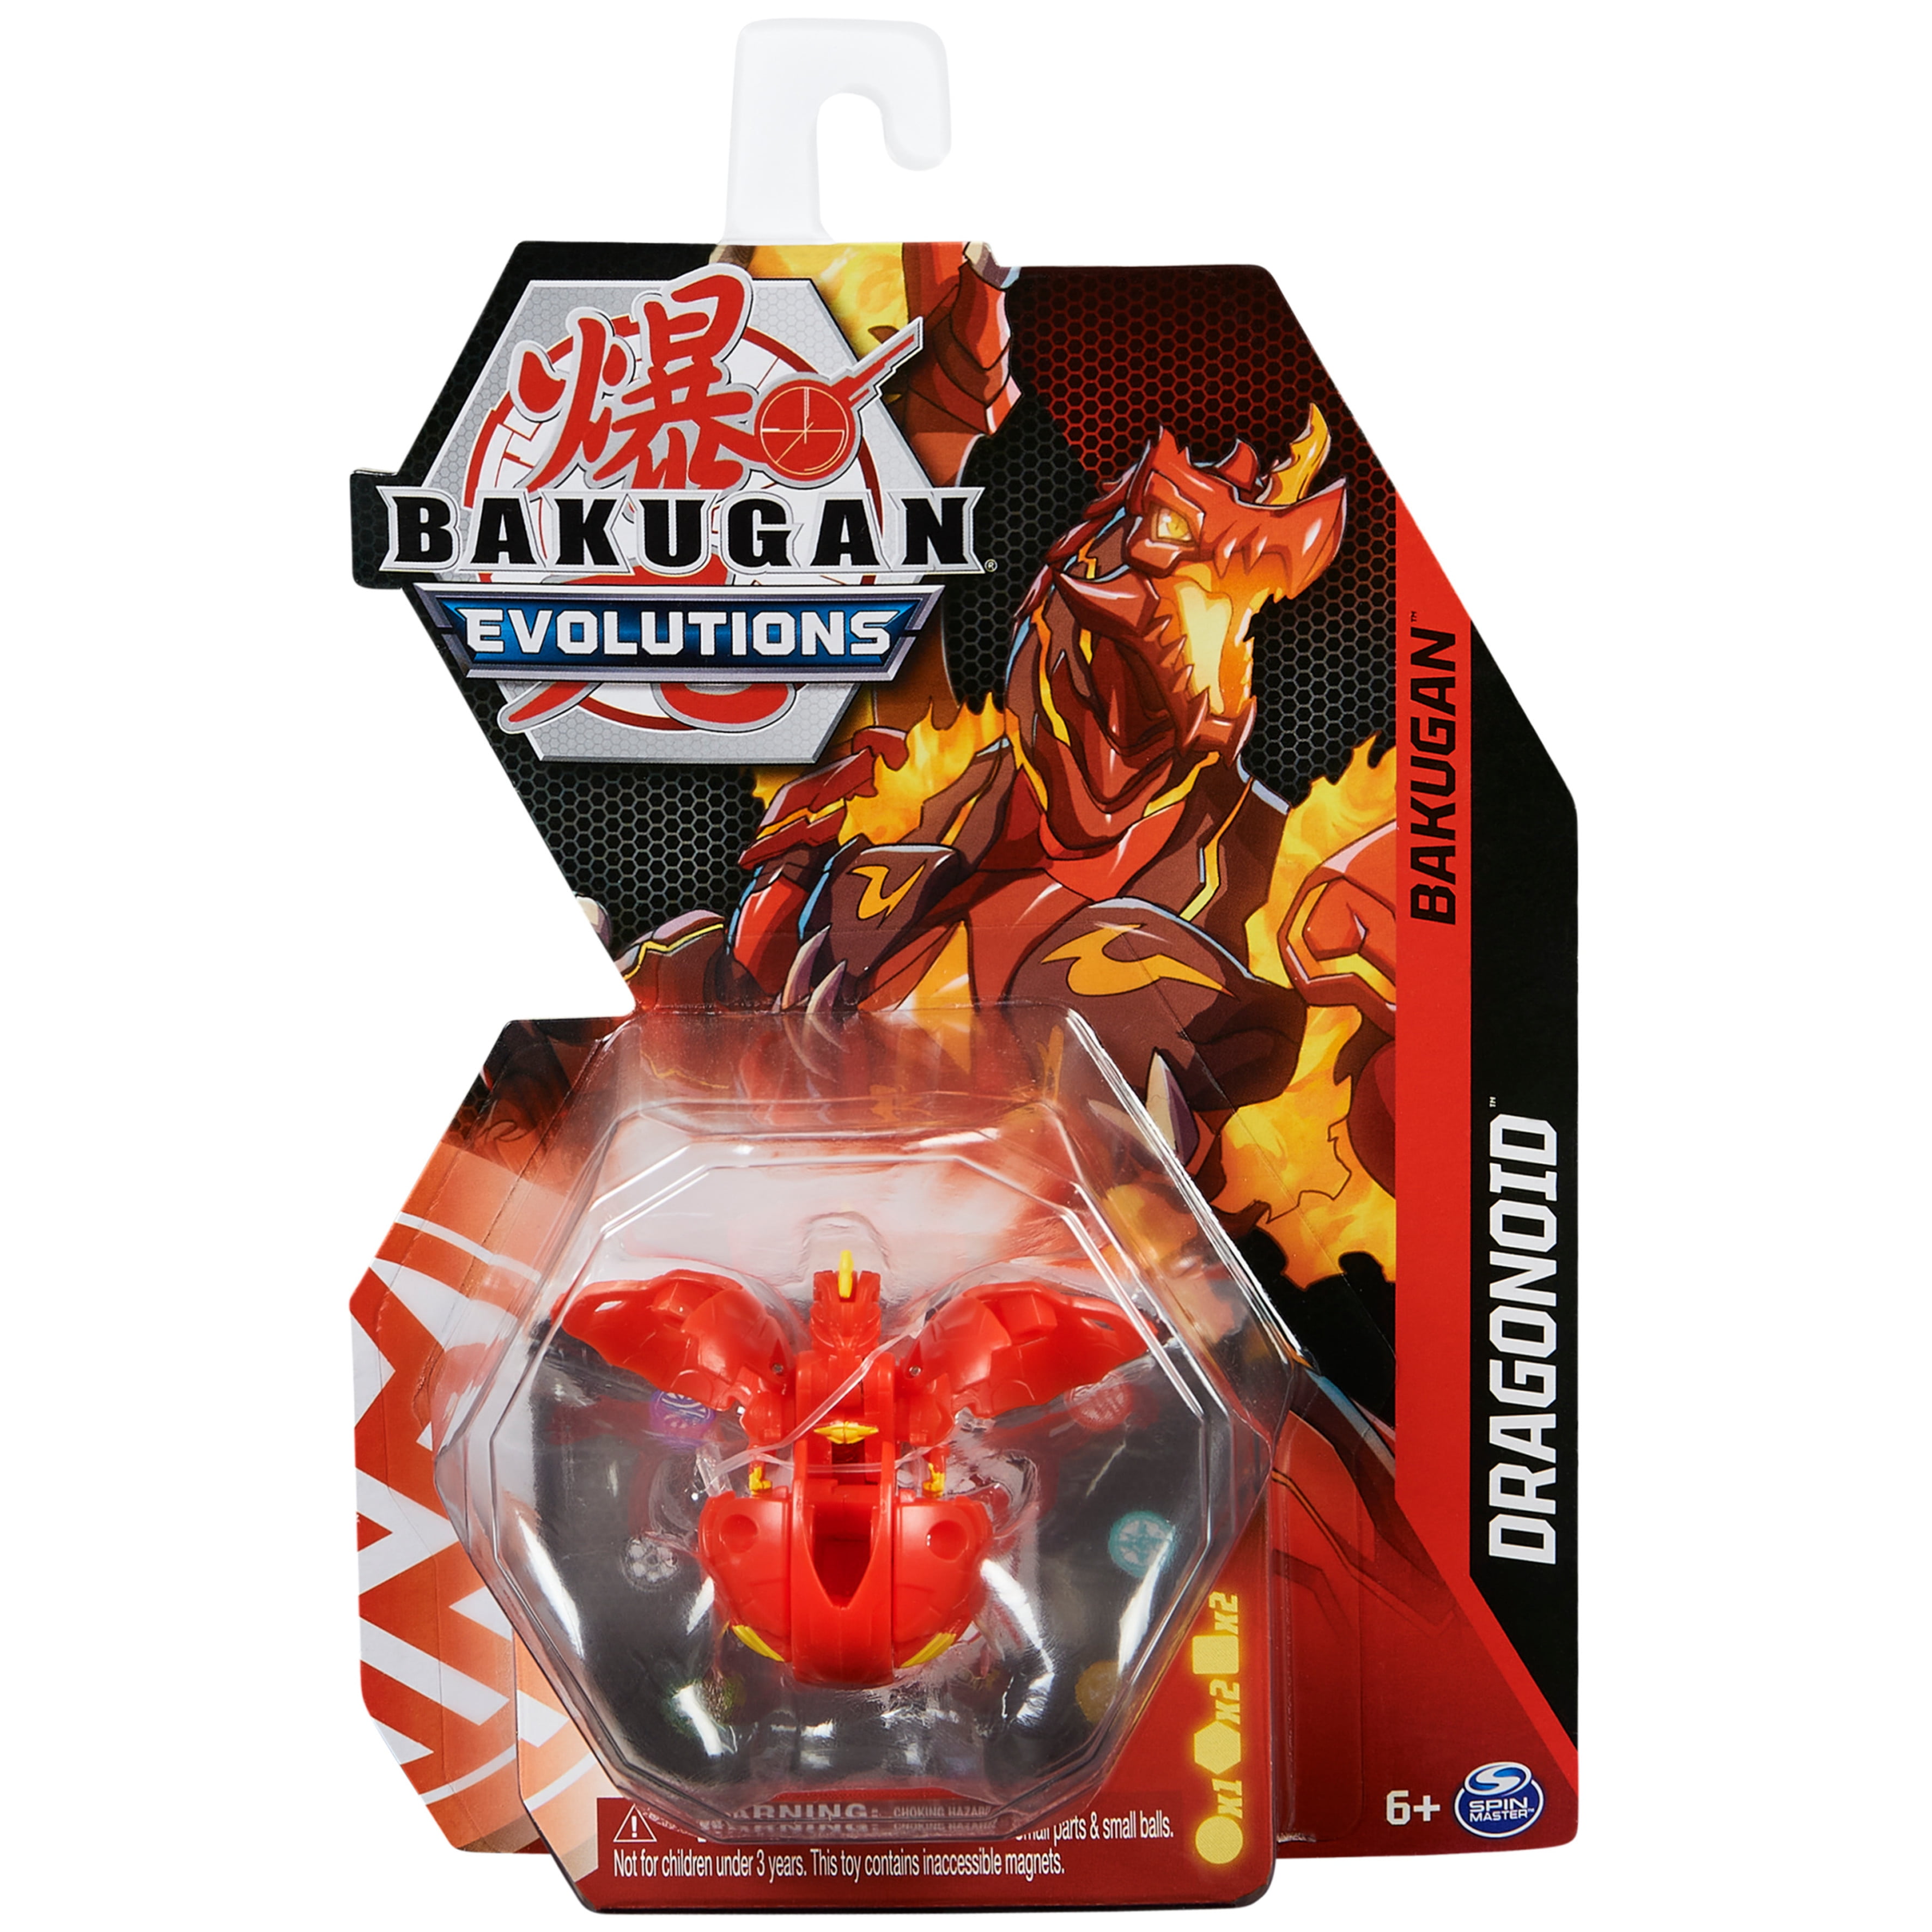 Bakugan Exclusive Deluxe Figure and Card By Spin Master 